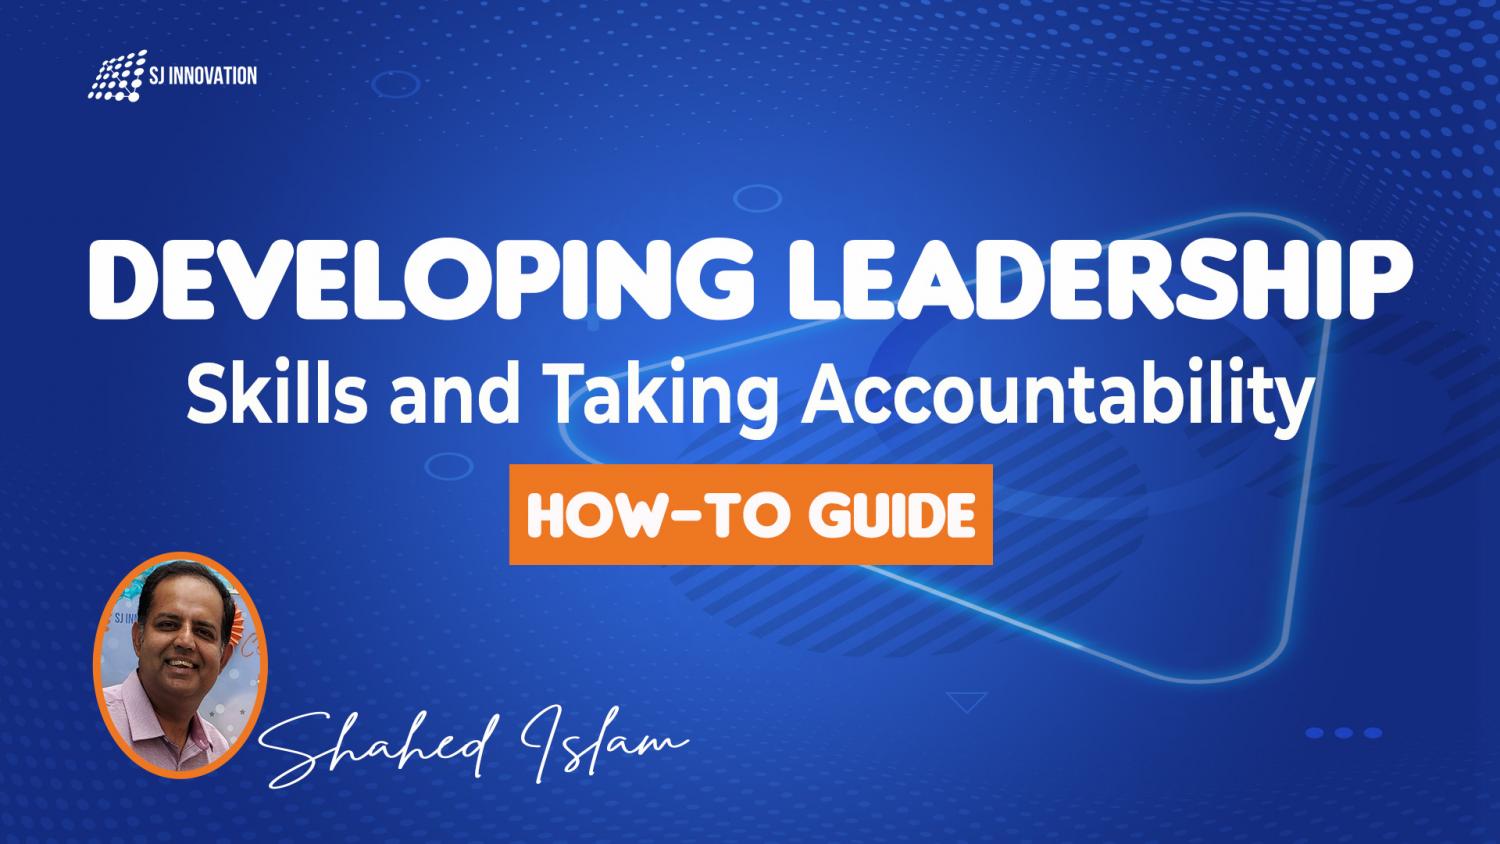 How to Develop Leadership Skills and Taking Accountability